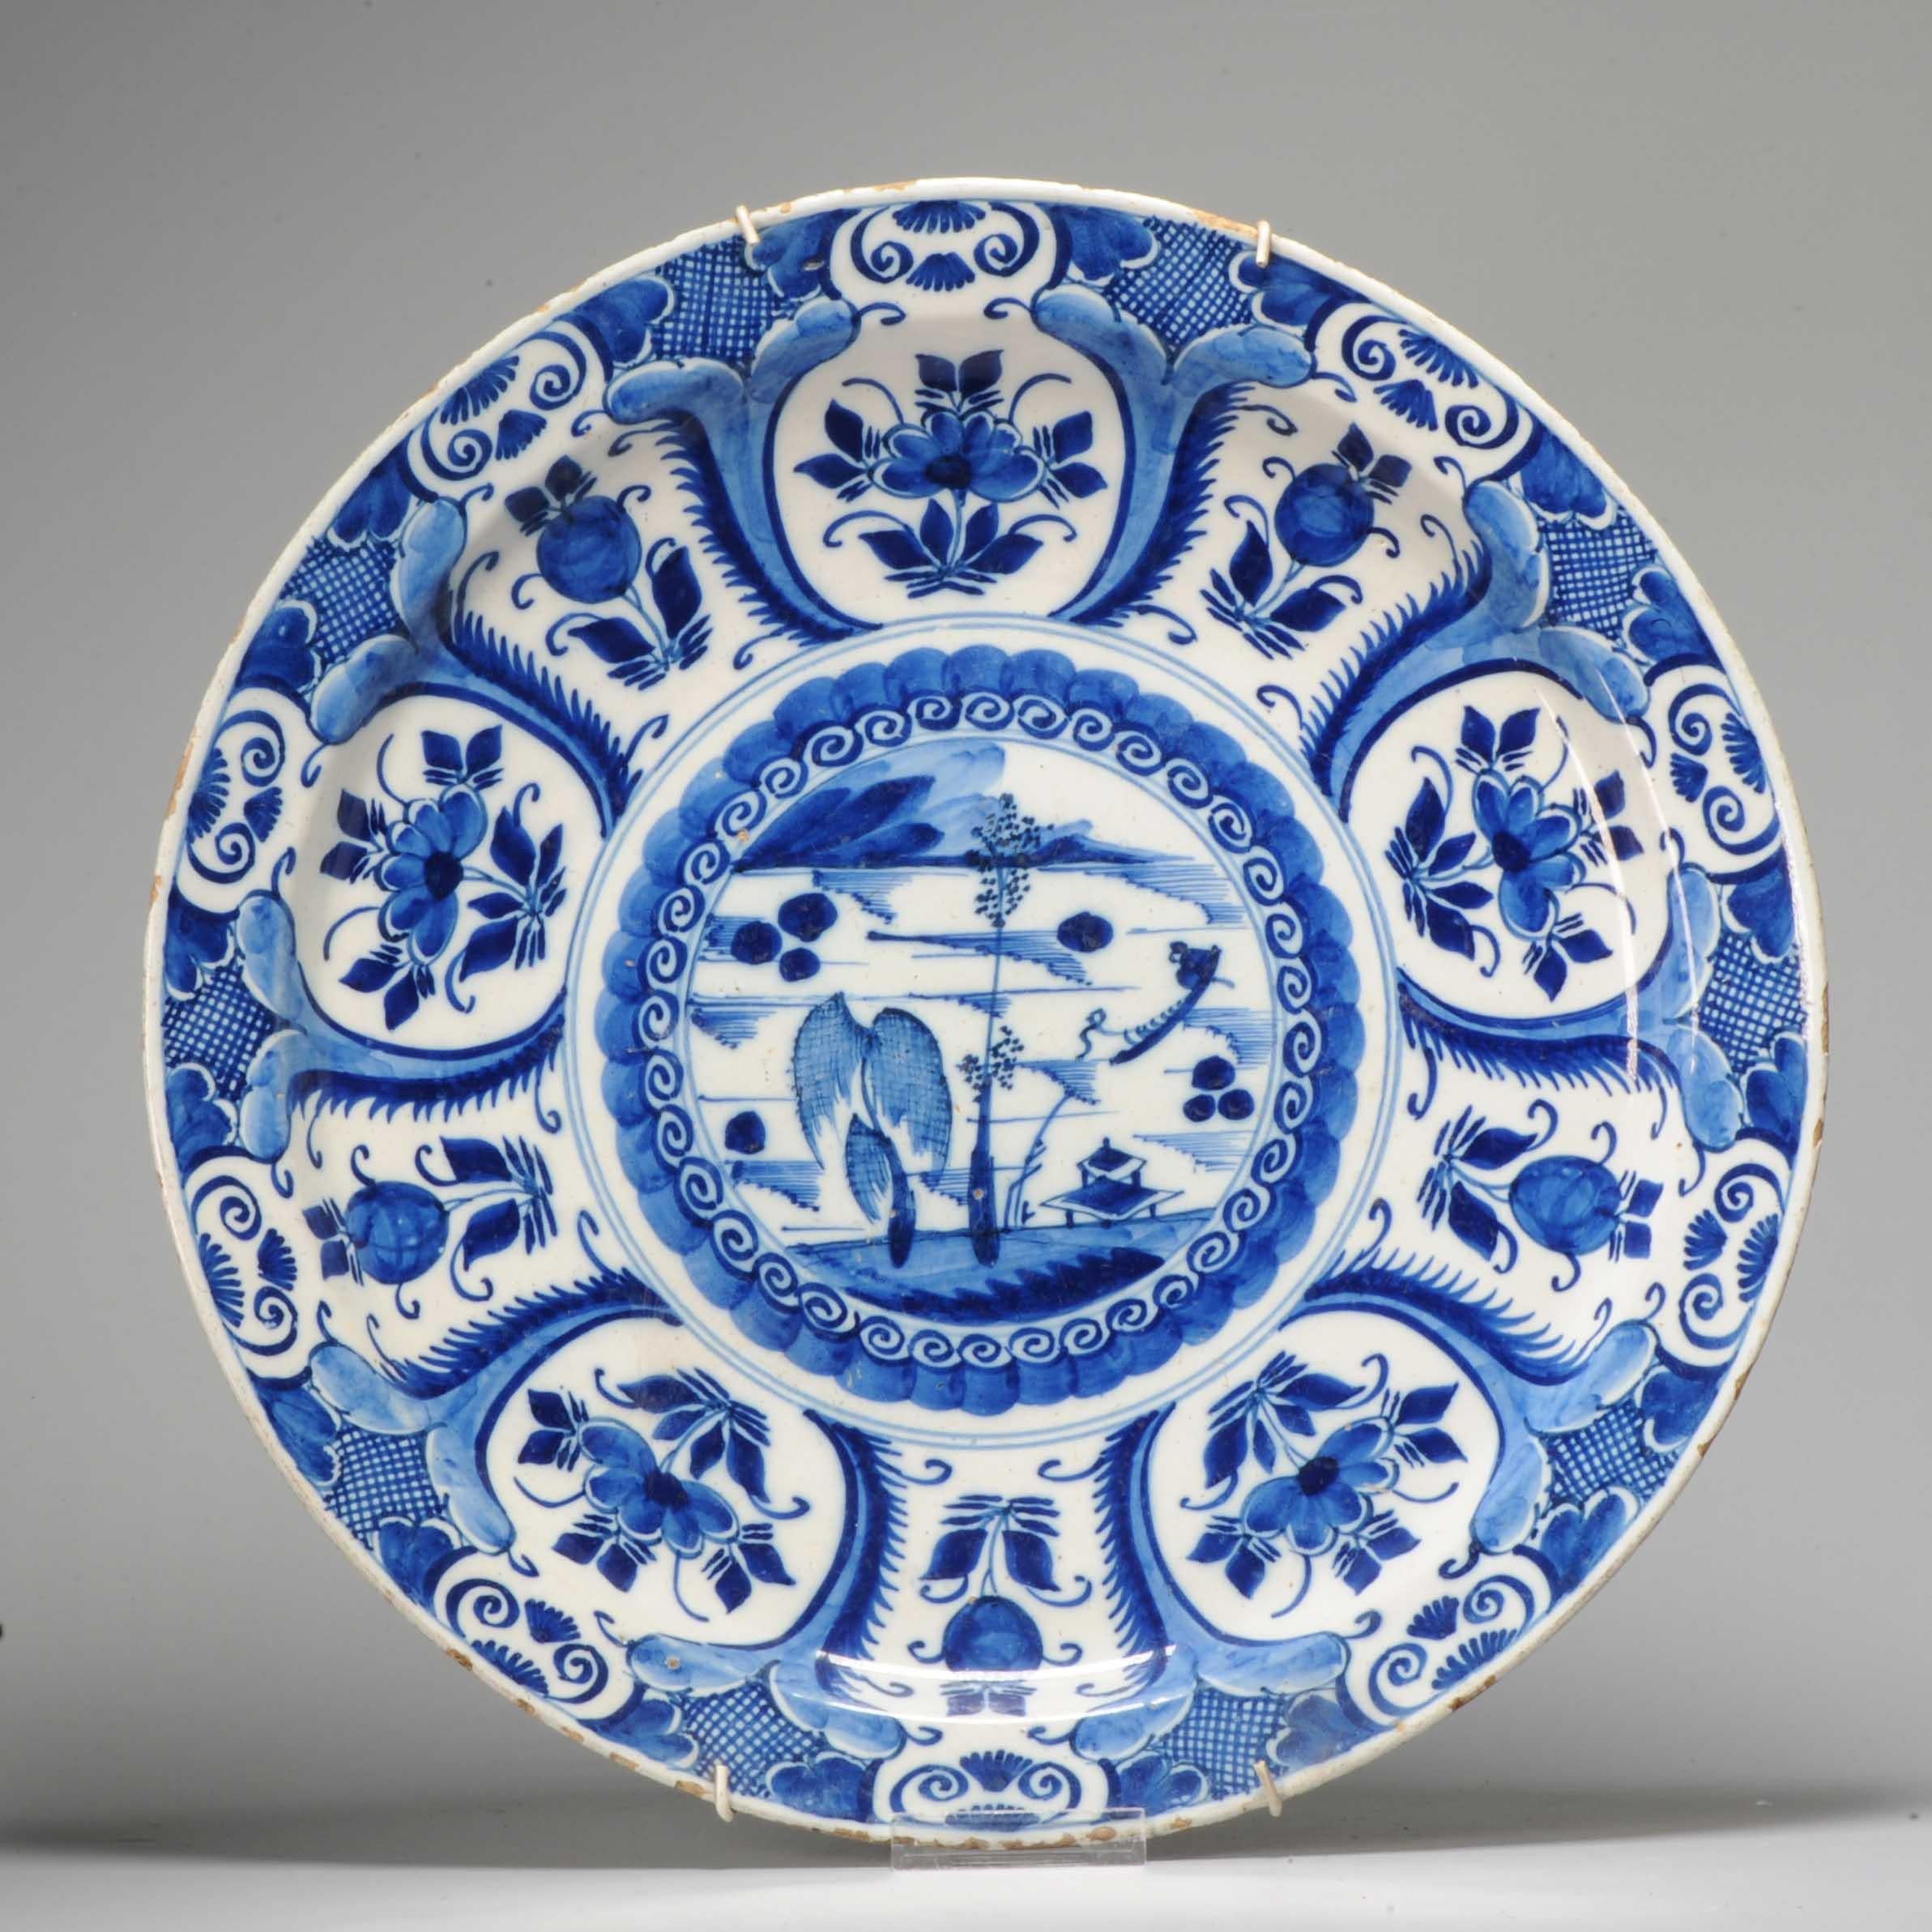 Earthenware dish with a flat rim. Decorated in different shades of blue on a white tin glaze

Condition
typical rimfritting only. Size 400 x 50mm Diameter x Height
Period
18th century.